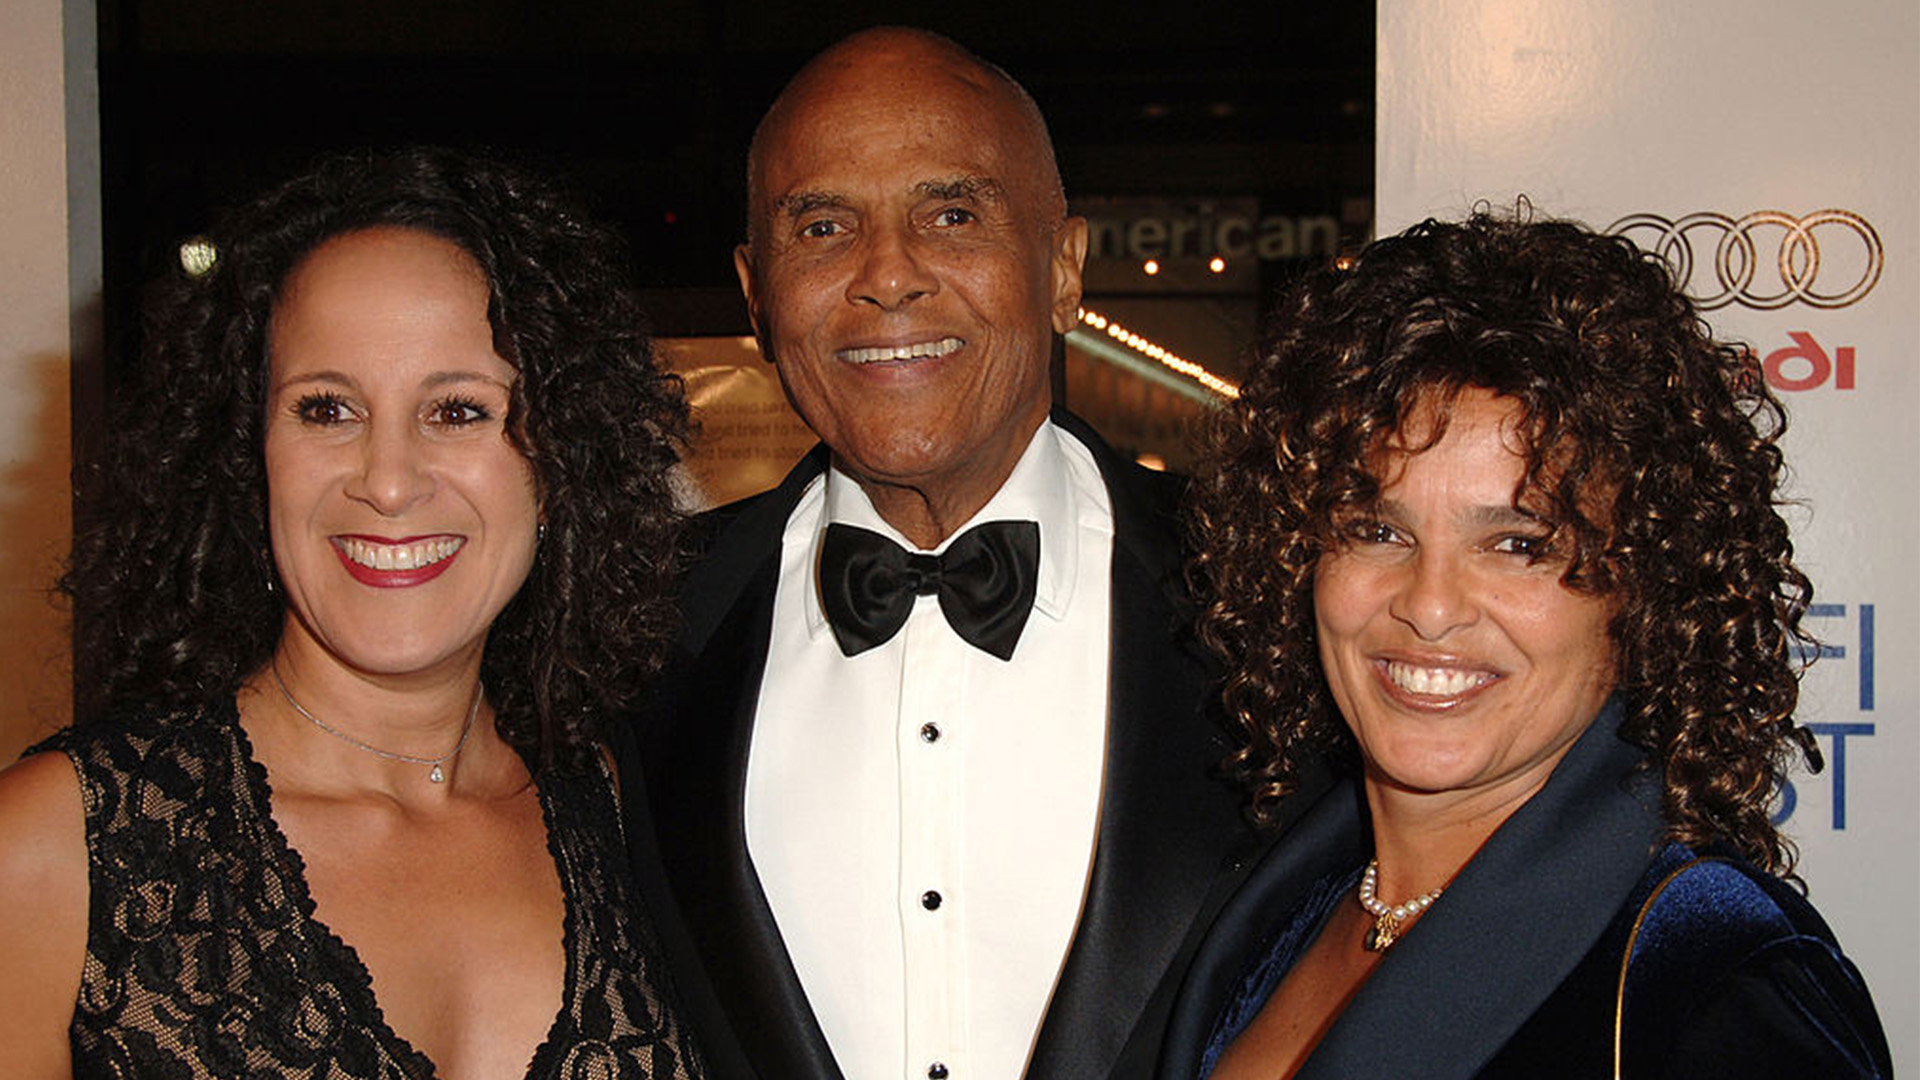 How Harry Belafonte Amassed A $30M Fortune During His Career And Led His Kids To Follow In His Footsteps